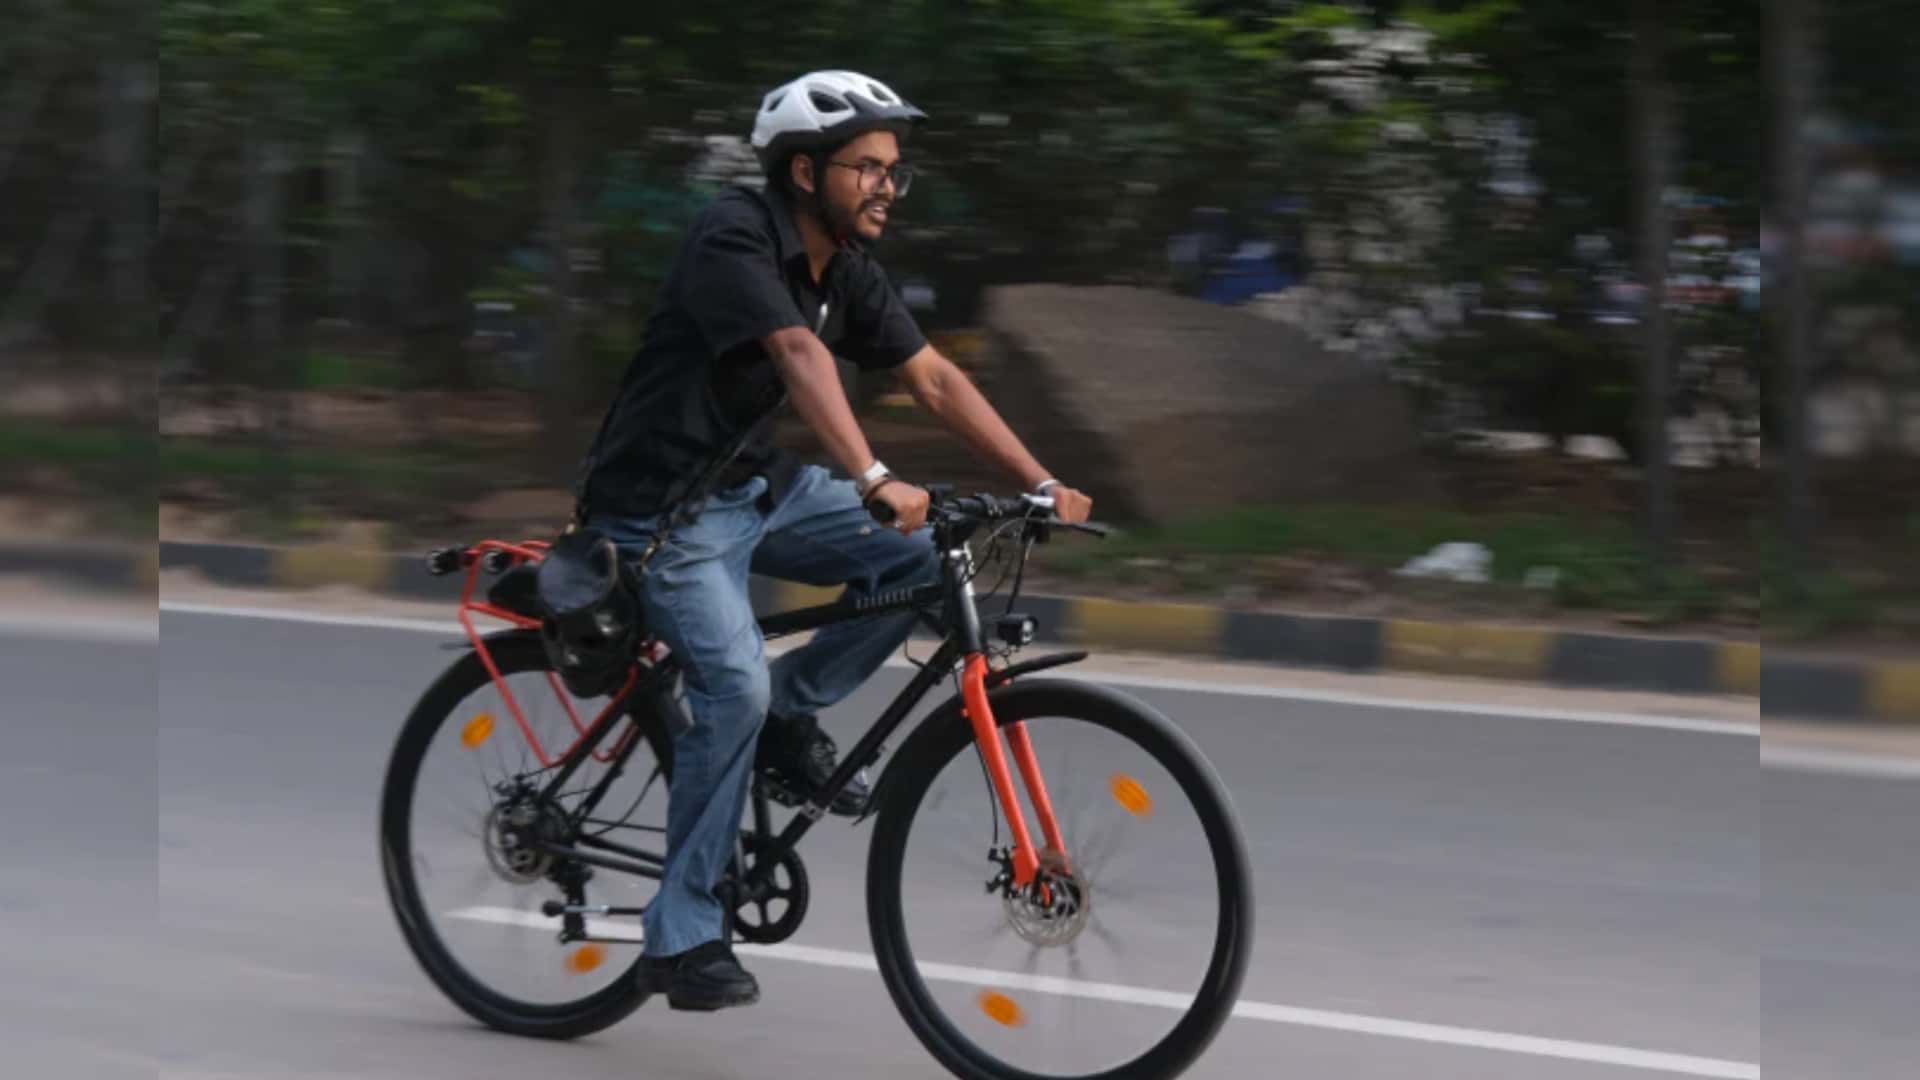 check out the hornback x1 folding e-bike from india